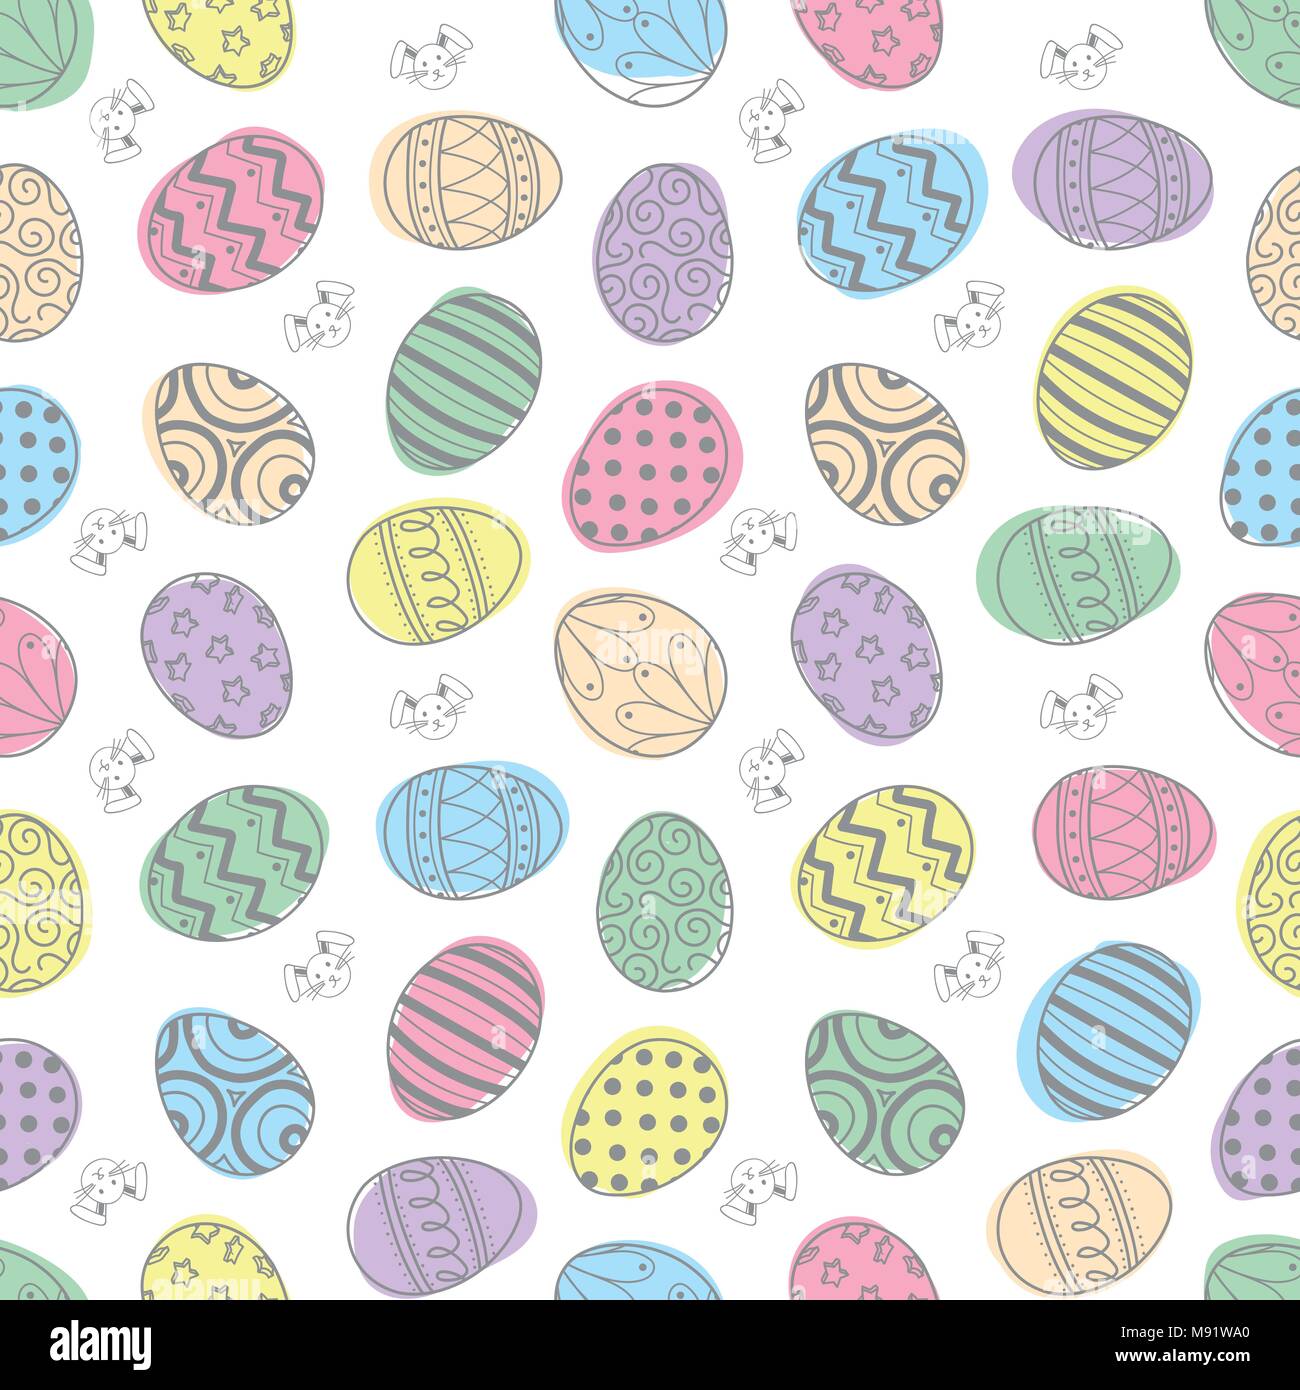 Easter eggs in light gray outline and colorful plane with bunny random on white background. Cute hand drawn seamless pattern design for Easter festiva Stock Vector